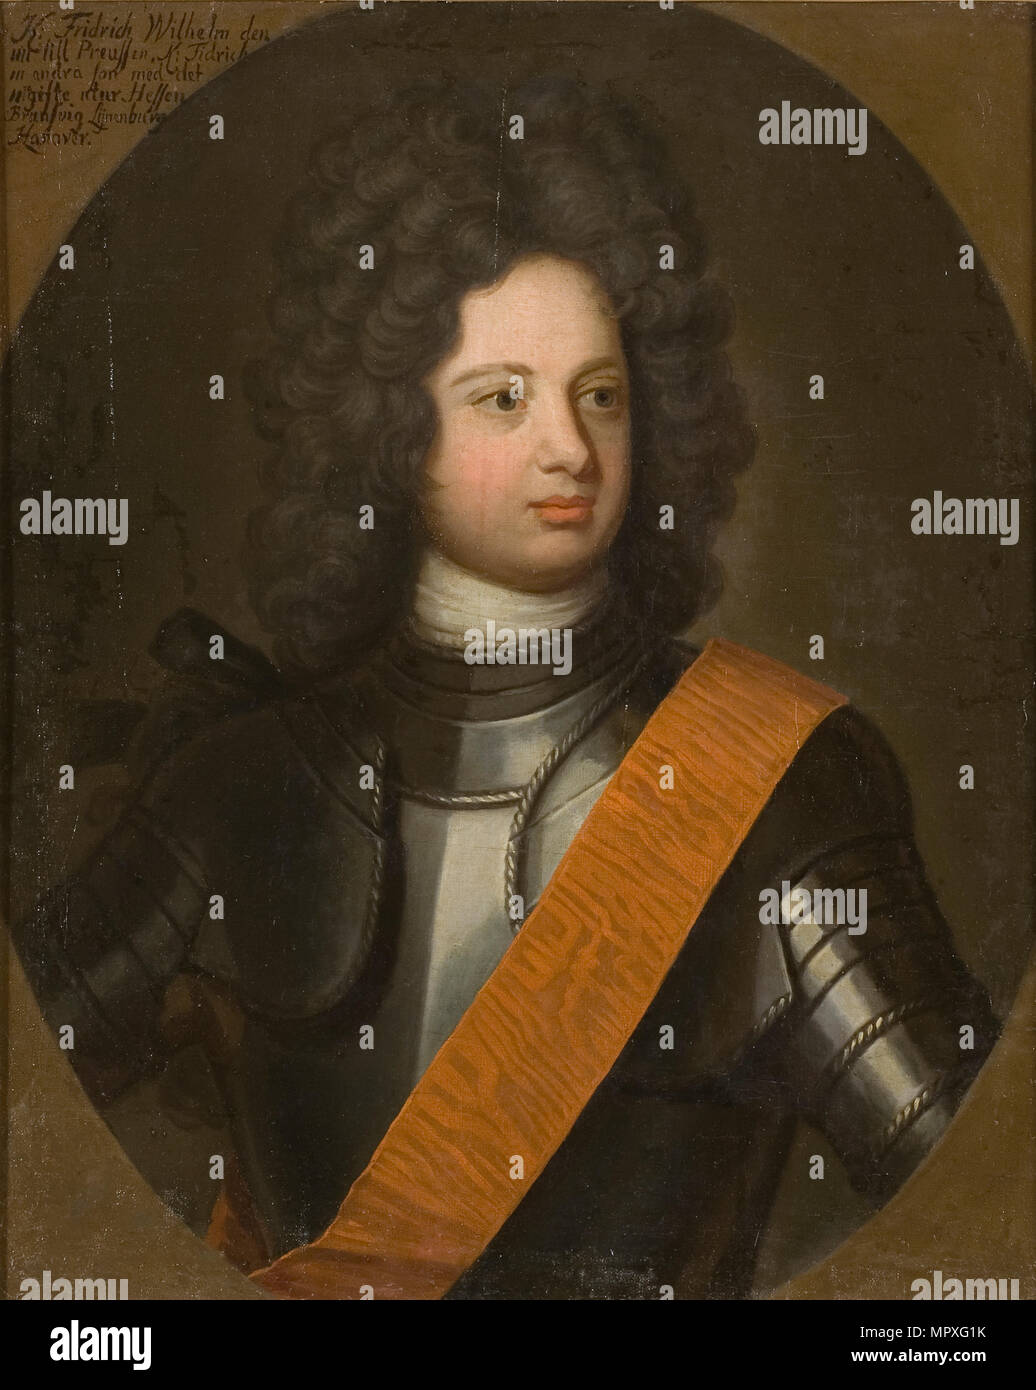 Portrait of Frederick William I (1688-1740), King in Prussia, Early 18th cen.. Stock Photo